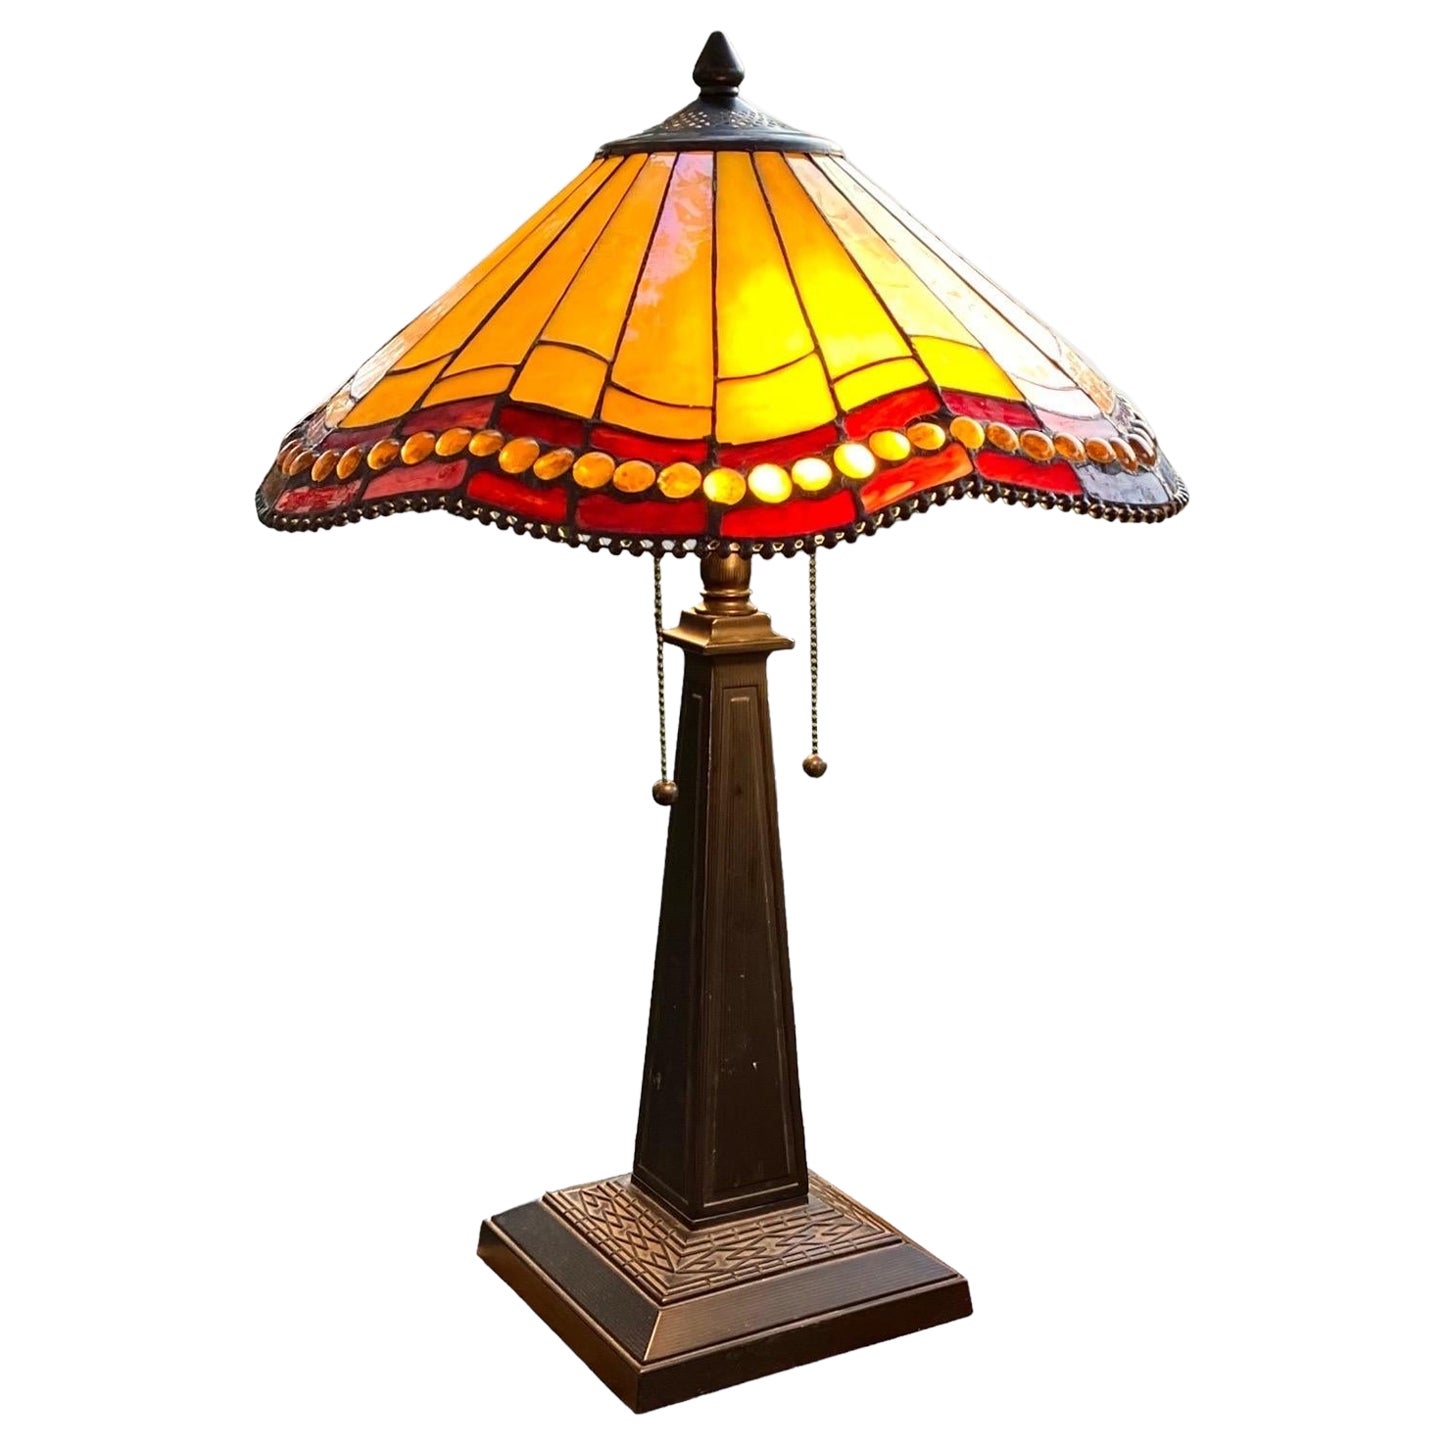 Arts and Crafts Style Table Lamp with Beaded Slag Glass Shade